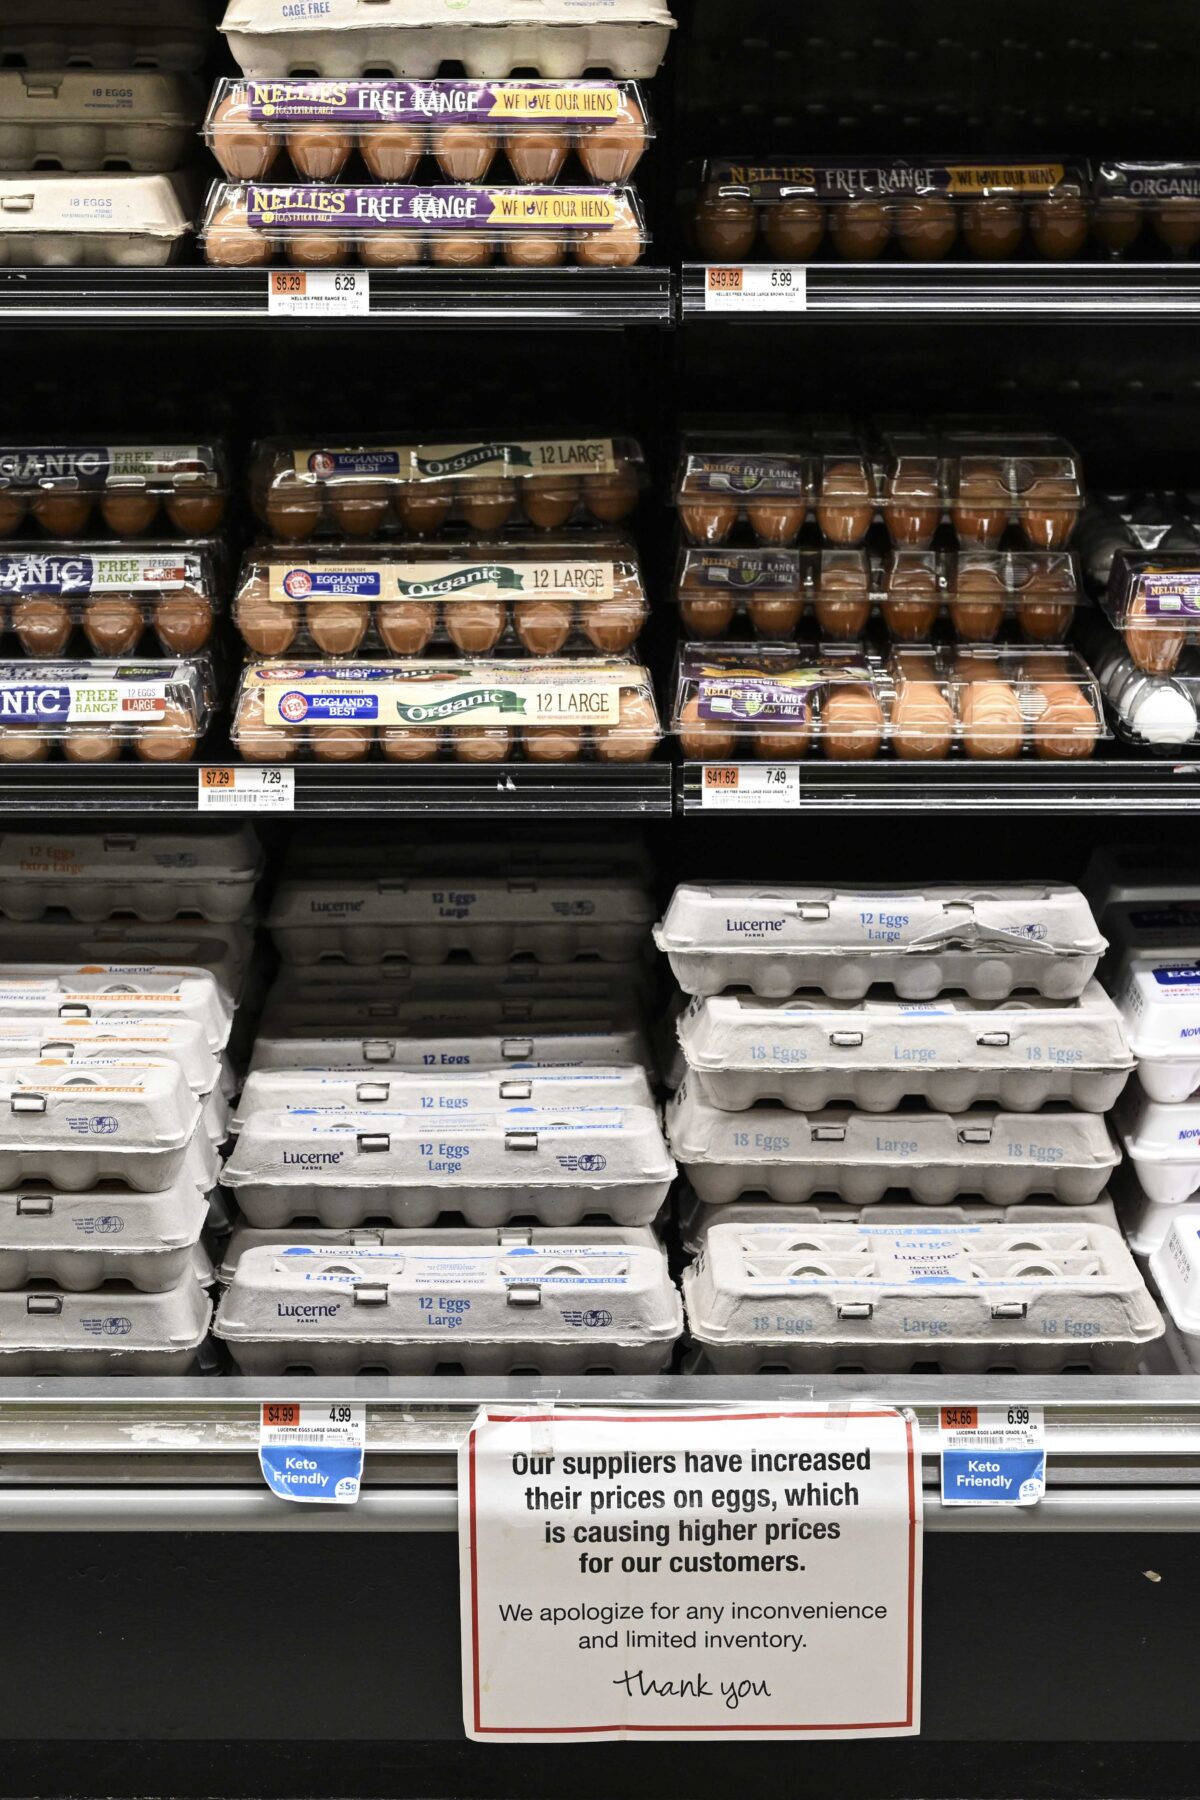 NEW YORK, UNITES STATES - JANUARY 21: Egg shelves are seen with a note apologizing to customers for the price increase after the reduction in productivity brought on by poultry fatalities caused by various illnesses in New York, United States on January 21, 2023. The egg prices jumped by two to three times across the country, from 3 to 4 dollars per package to 9 to 11 dollars for organic eggs and from 2 to 3 dollars to 5 to 7 dollars for regular eggs. (Photo by Fatih Aktas/Anadolu Agency via Getty Images)